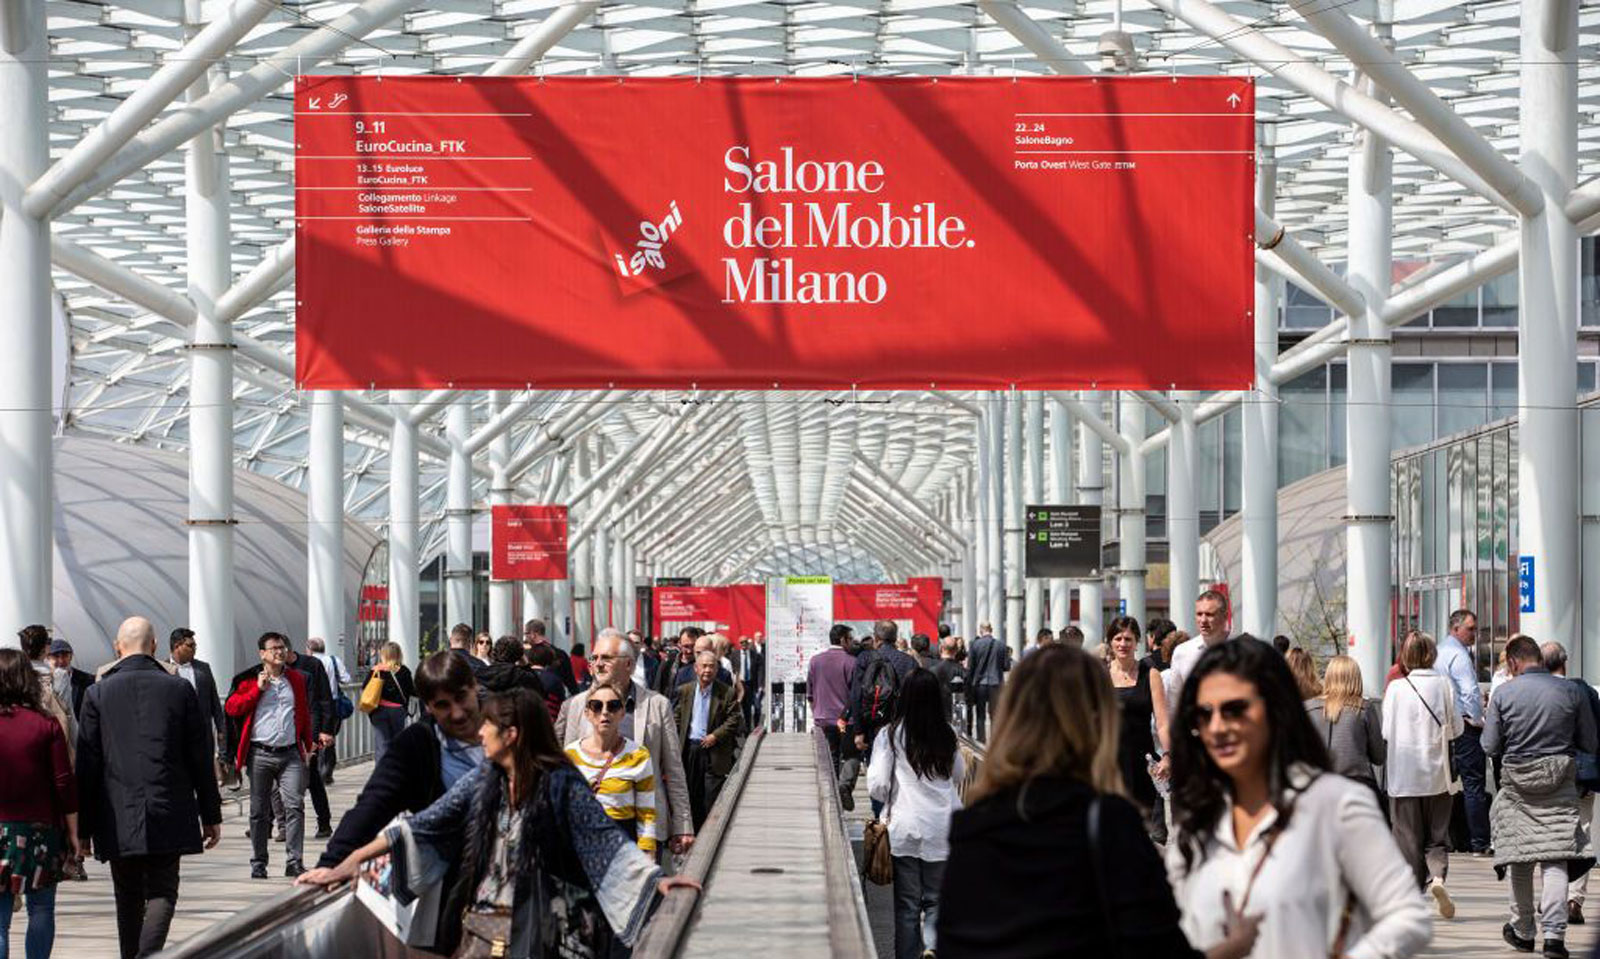 Salone del Mobile 2022: What to see this Milan Design Week